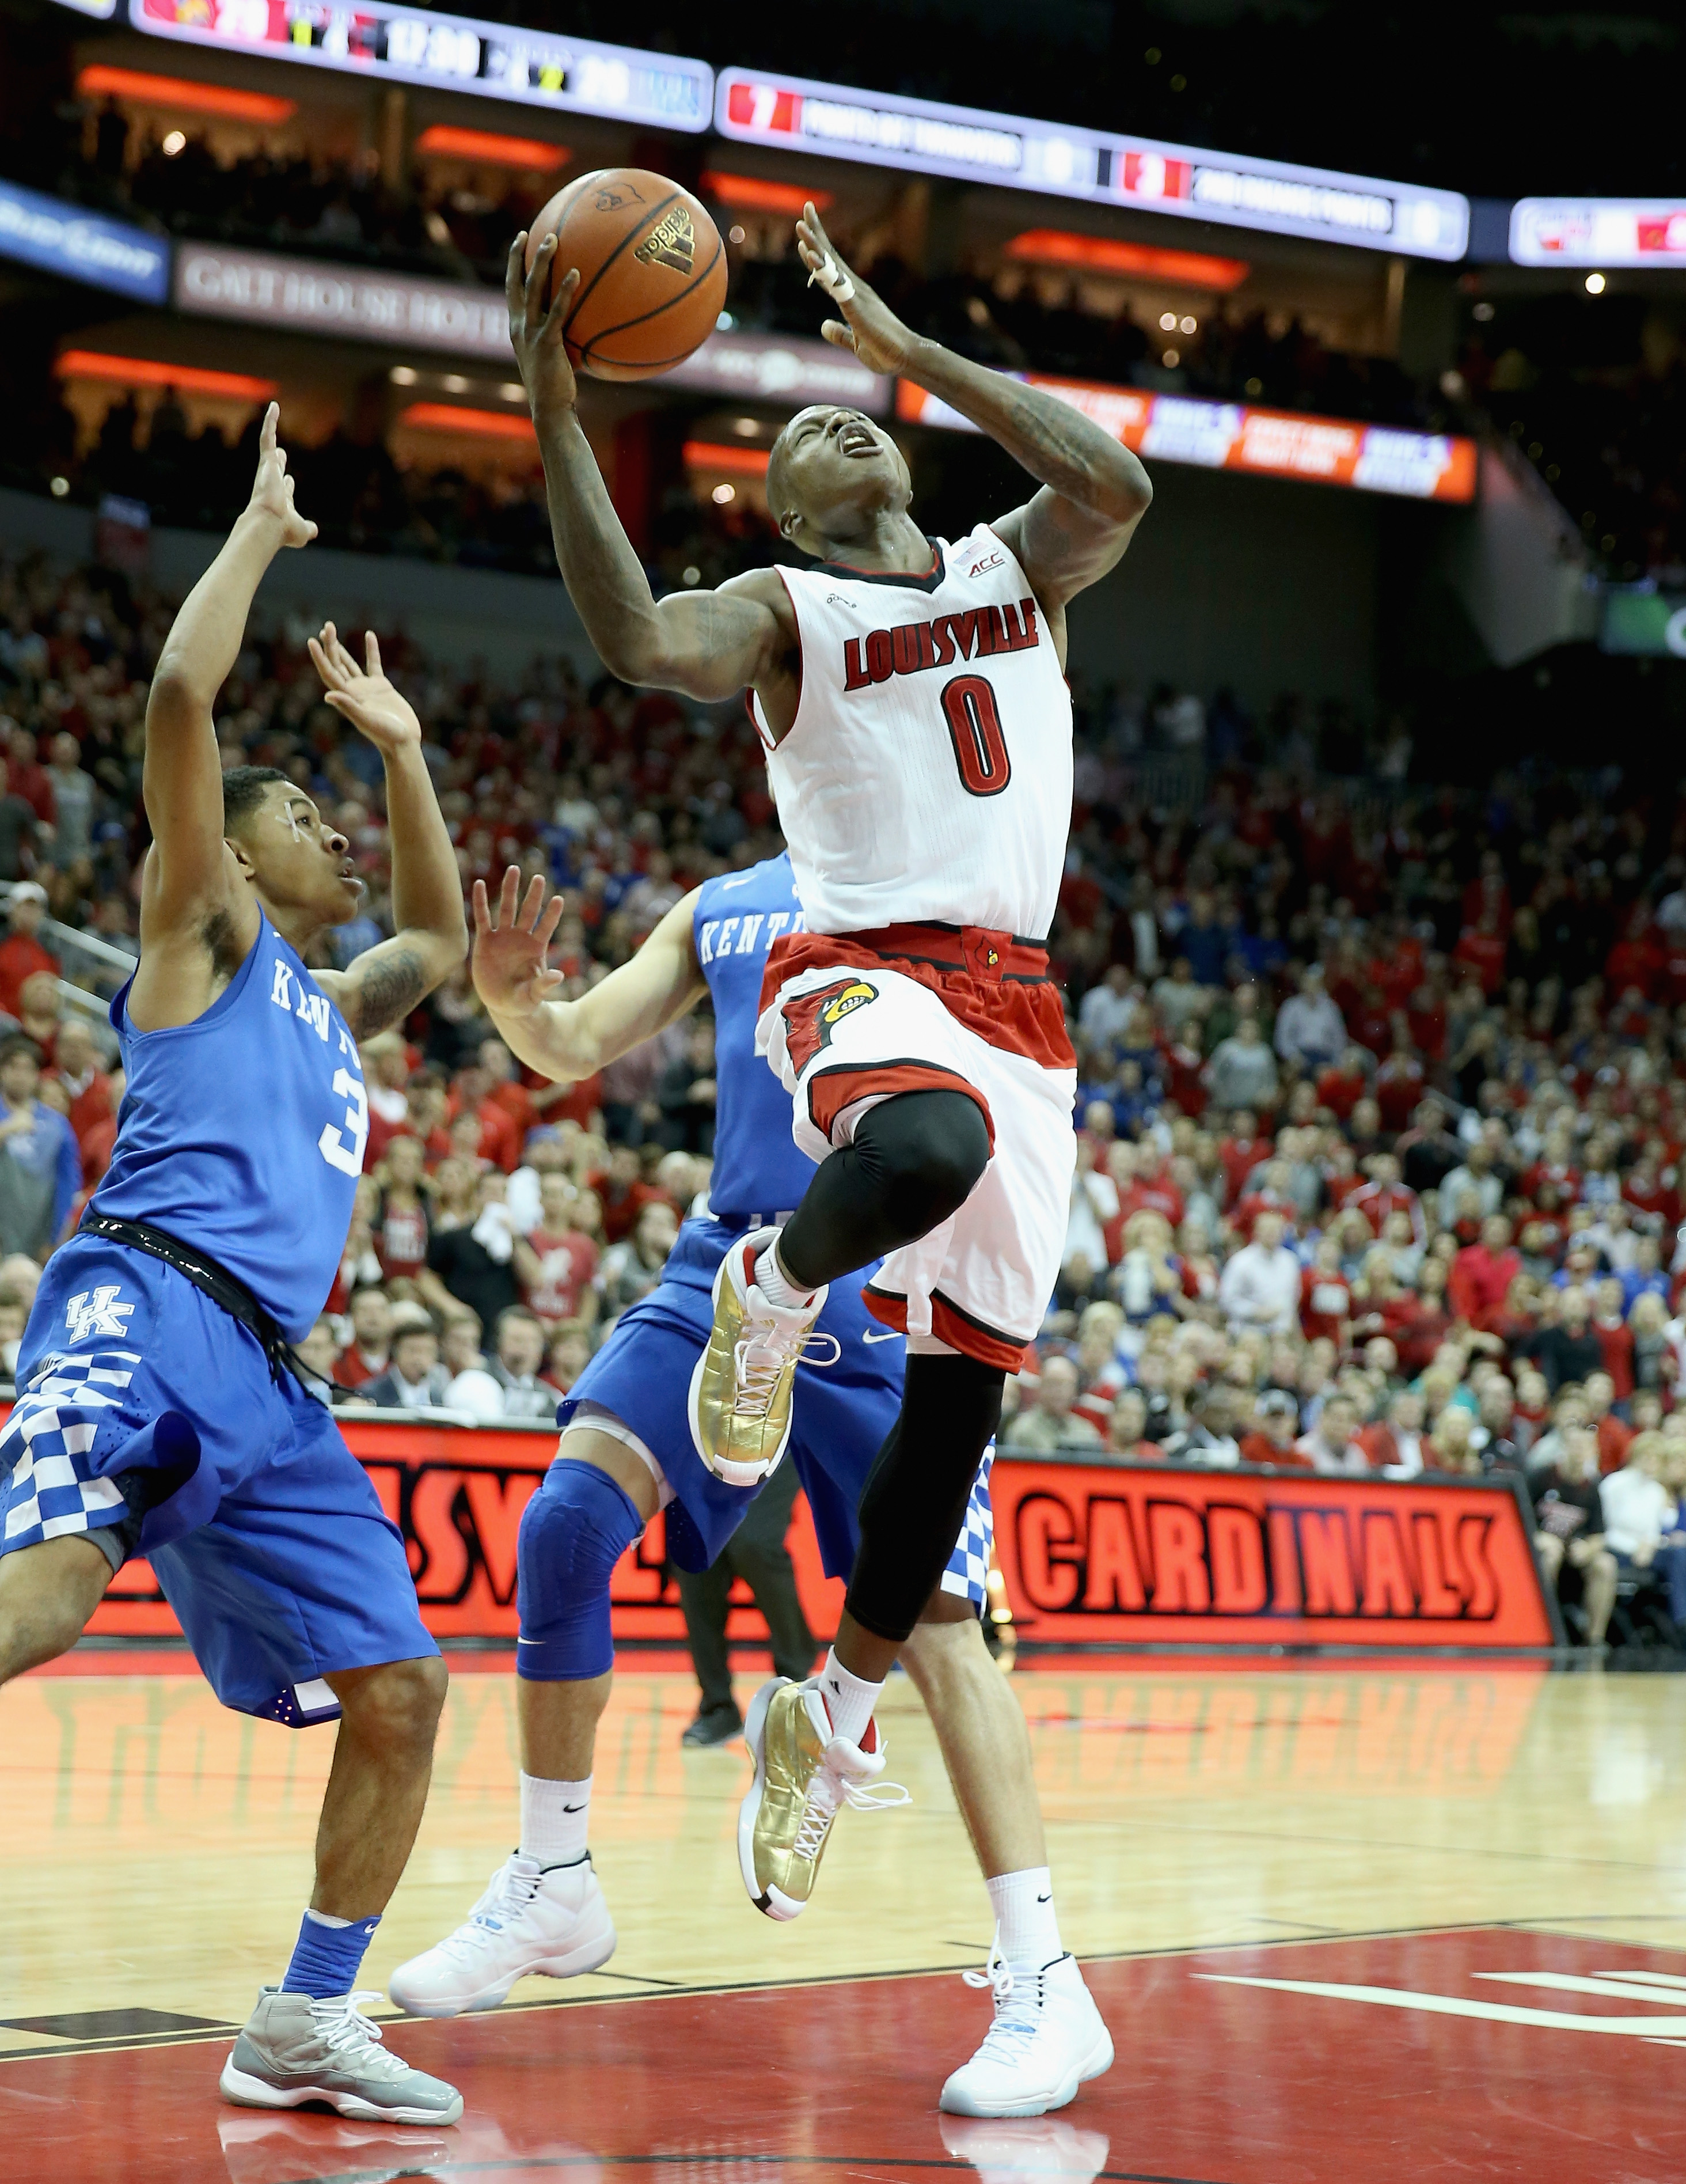 Terry Rozier #0 of the Louisville Cardinals shoots the ball during the game against the  Kentucky Wildcats at KFC YUM! Center on December 27, 2014 in Louisville, Kentucky. (Andy Lyons&mdash;Getty Images)